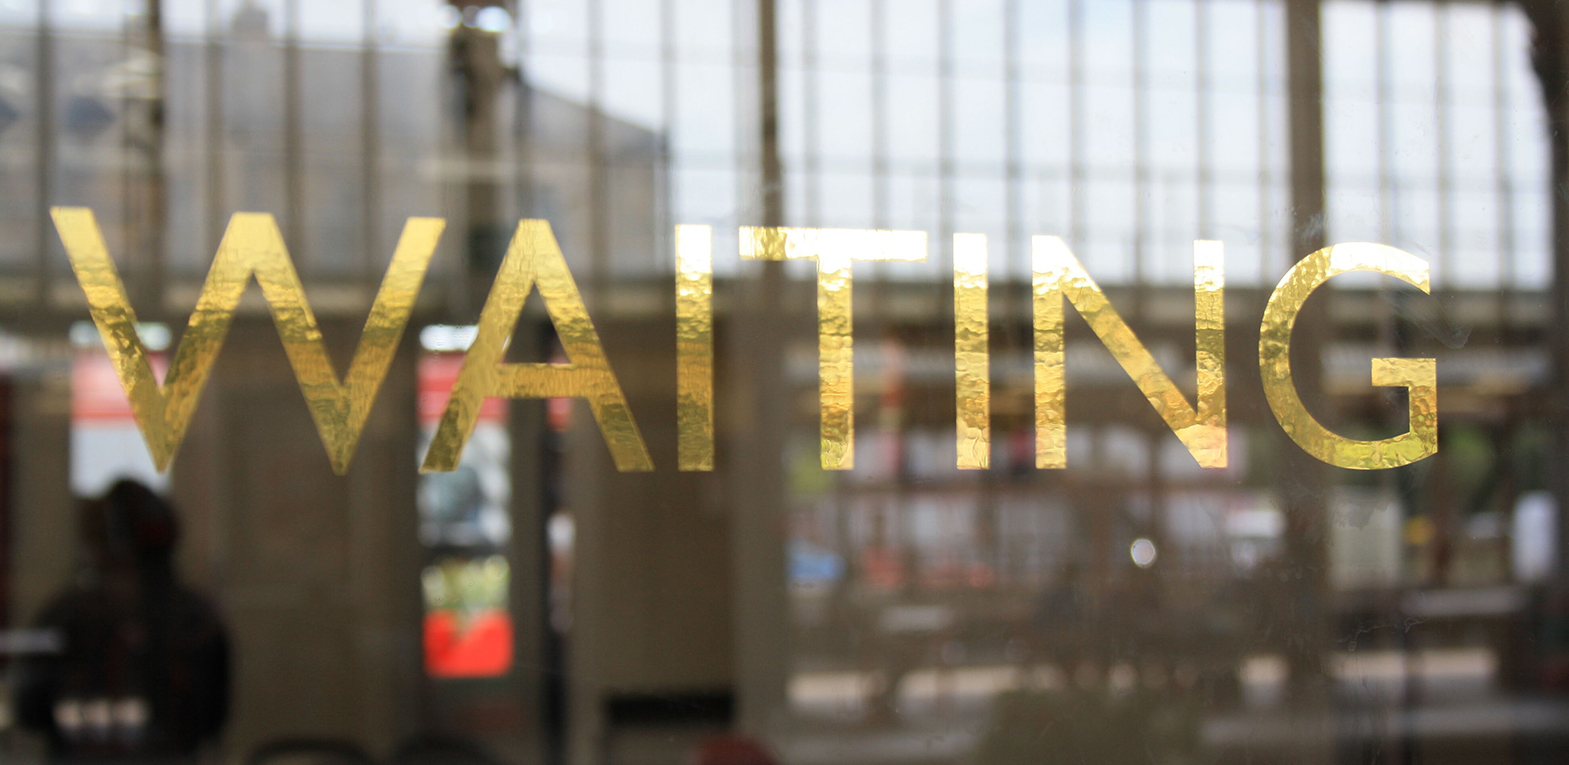 Letters on the windows of the waiting rooms of Preston train station as part of an artwork by Lisa Wigham. The word is 'waiting'.